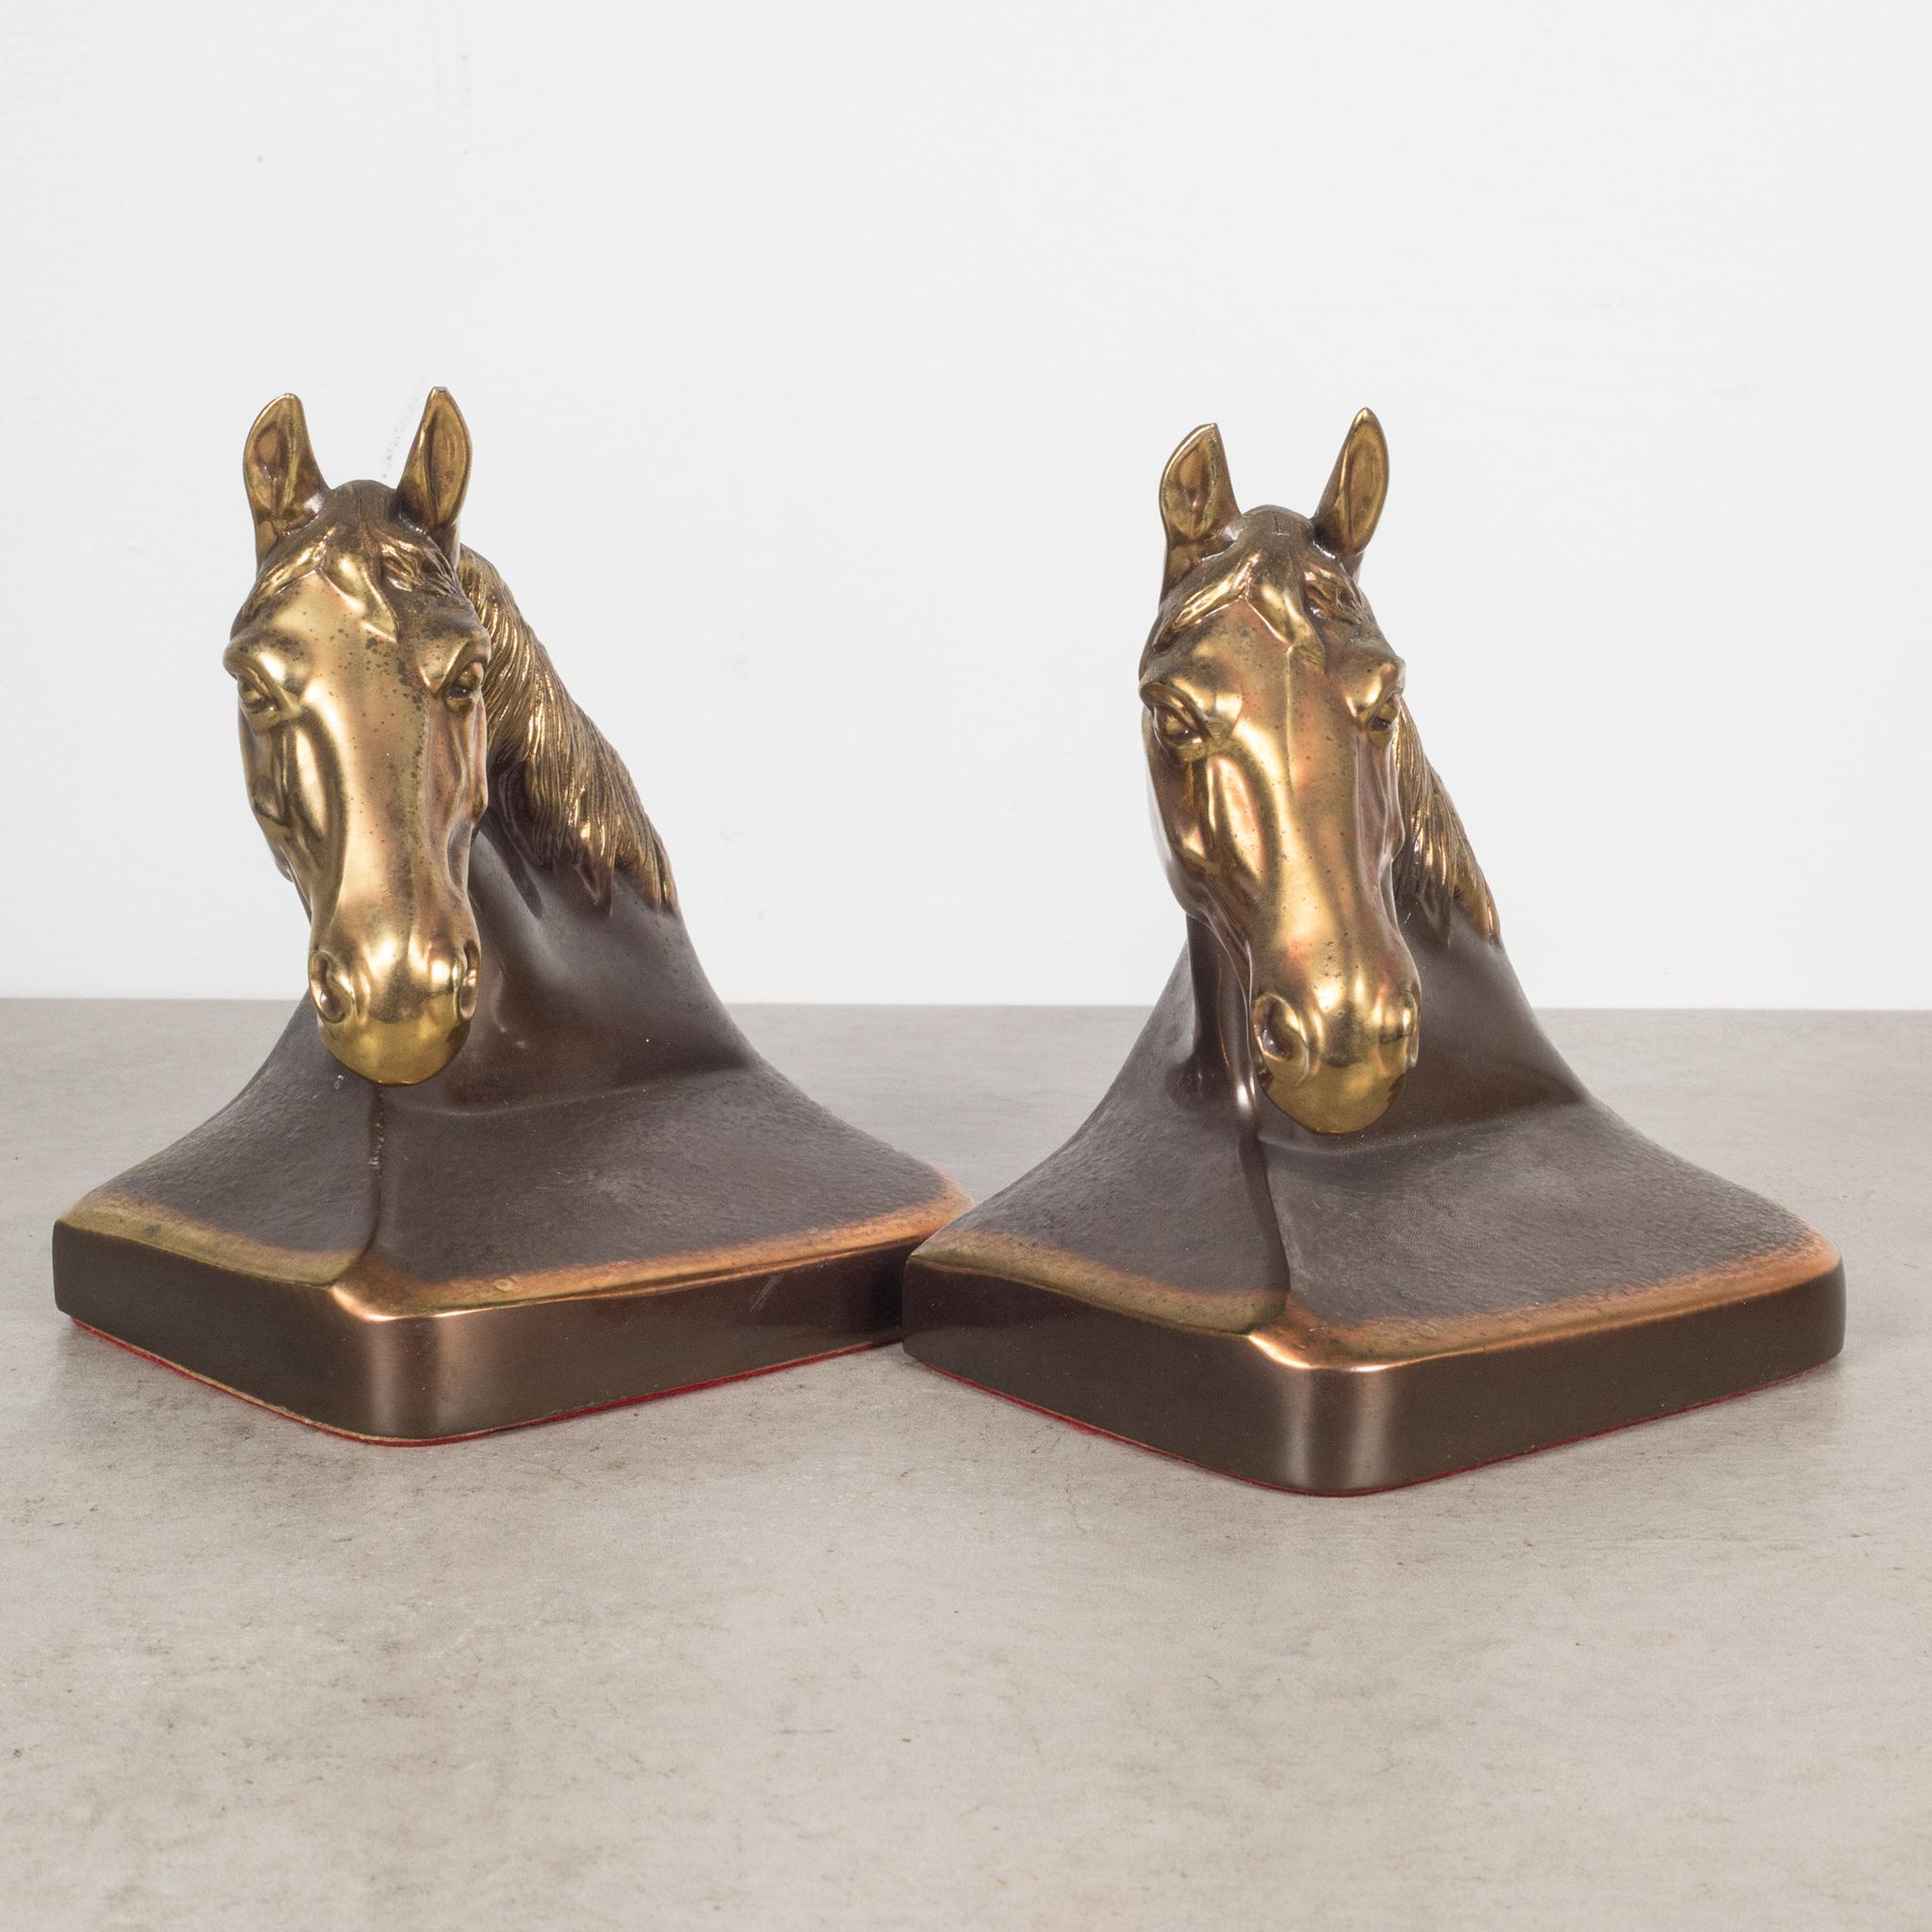 ABOUT

A vintage pair of bronze and copper plated horse bookends with original felt and original PMC stickers.

 CREATOR Philadelphia Manufacturing Company. 
 DATE OF MANUFACTURE c.1940s.
 MATERIALS AND TECHNIQUES Bronze Plate, Felt.
